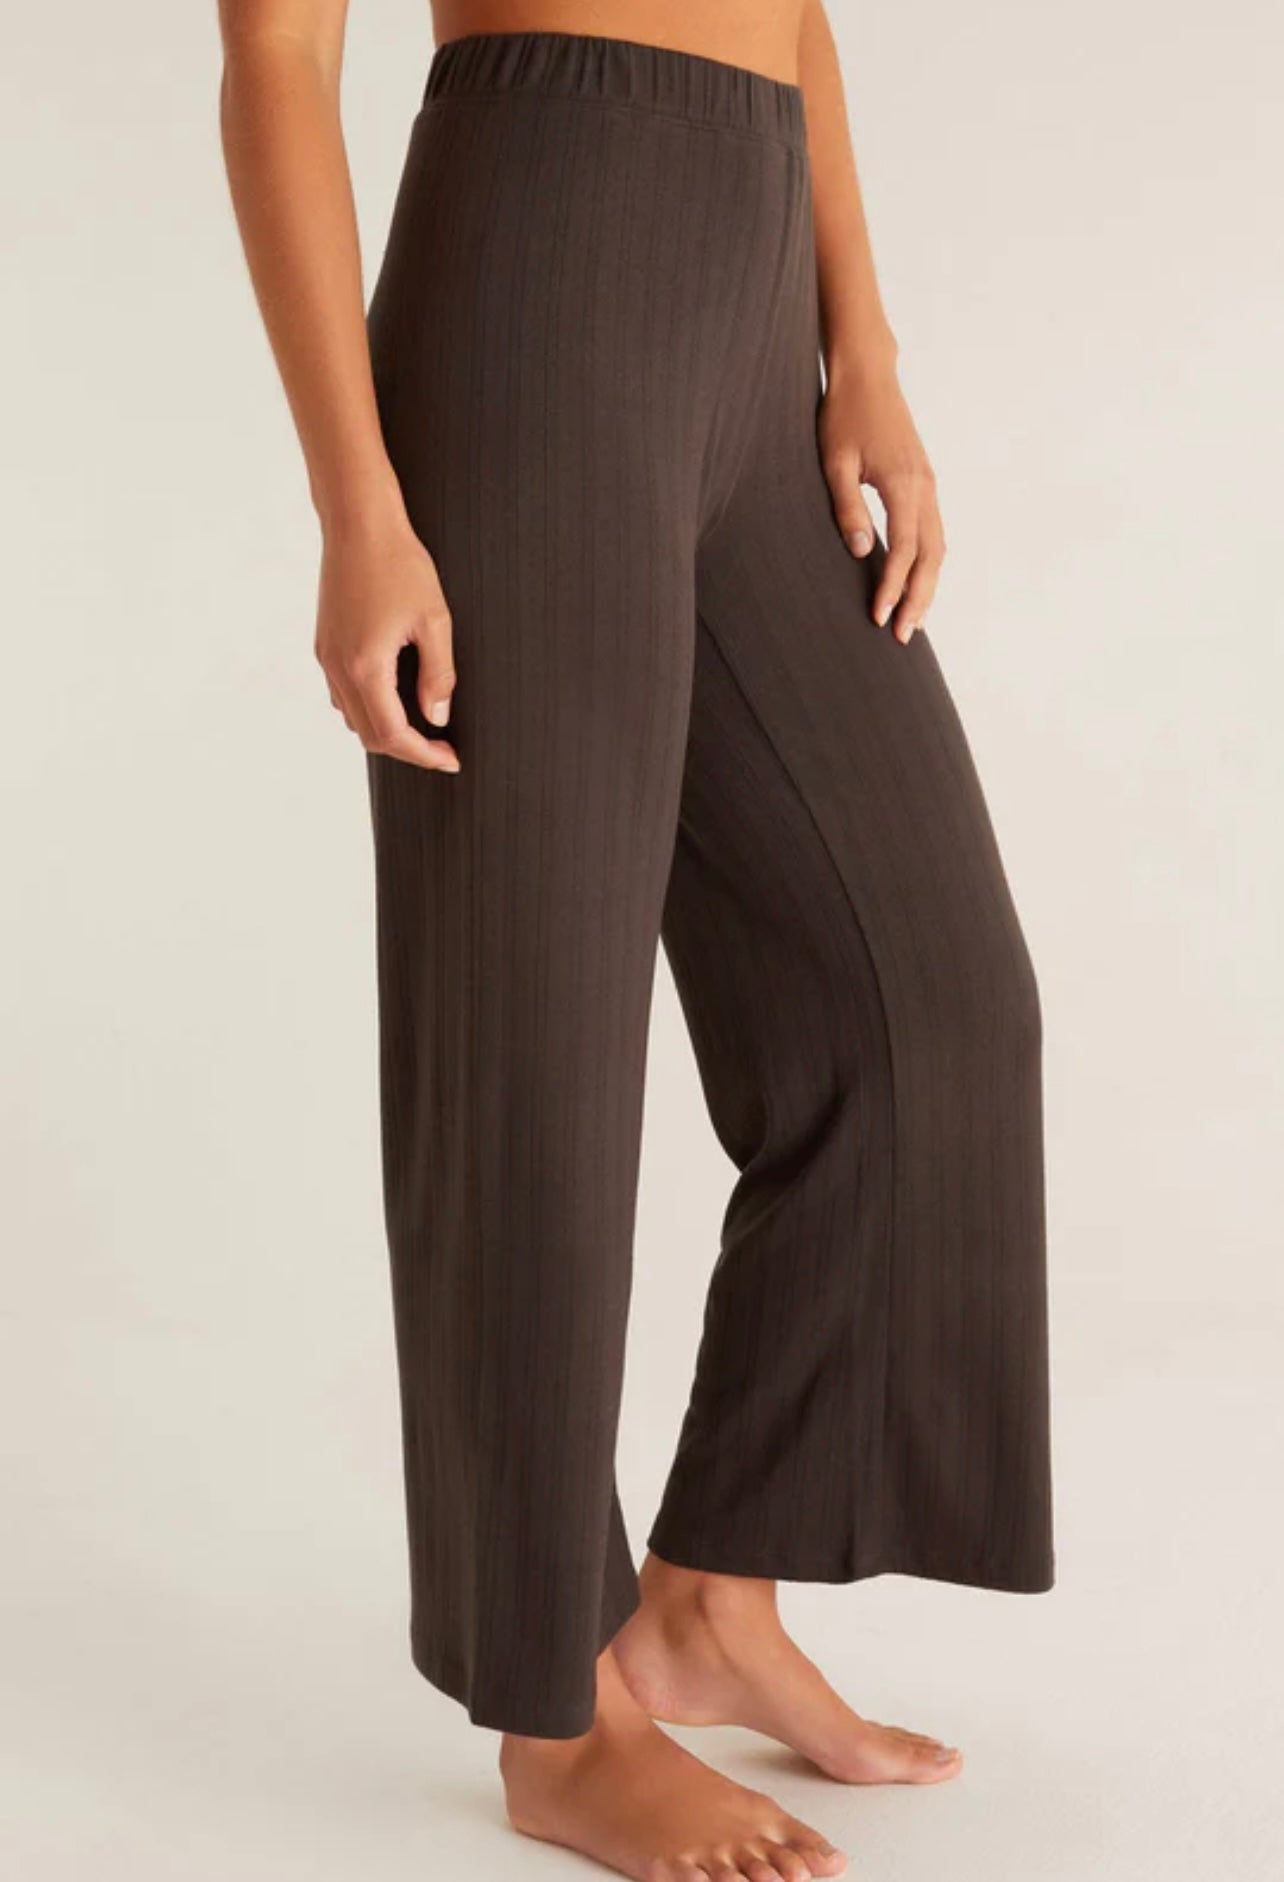 HOMEBOUND POINTELLE PANT